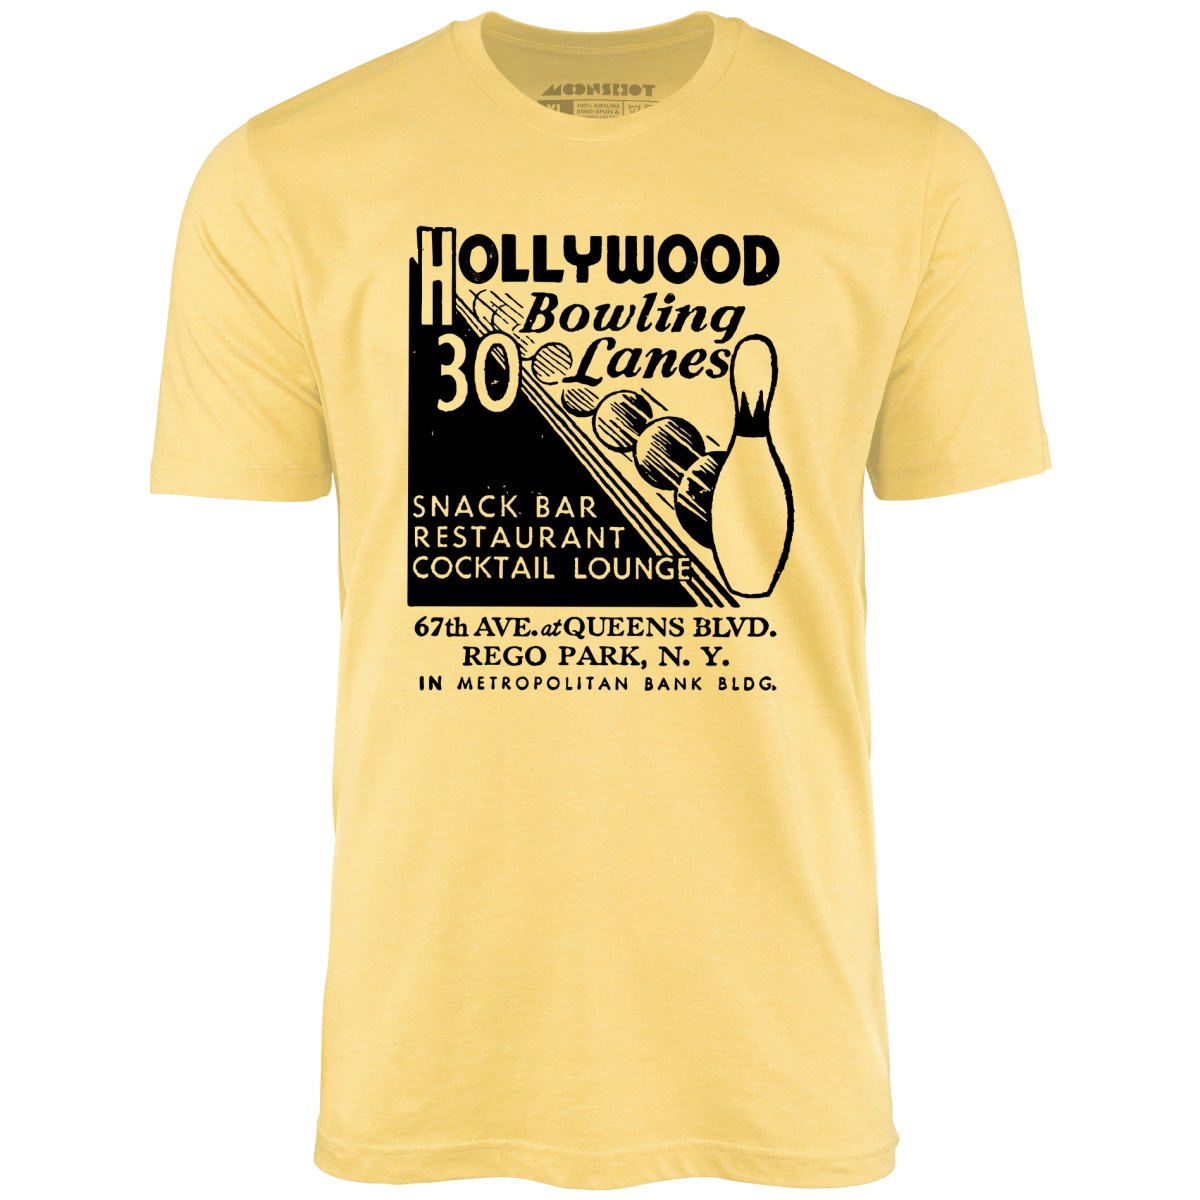 Hollywood Bowling Lanes - Rego Park, NY - Vintage Bowling Alley - Unisex T-Shirt